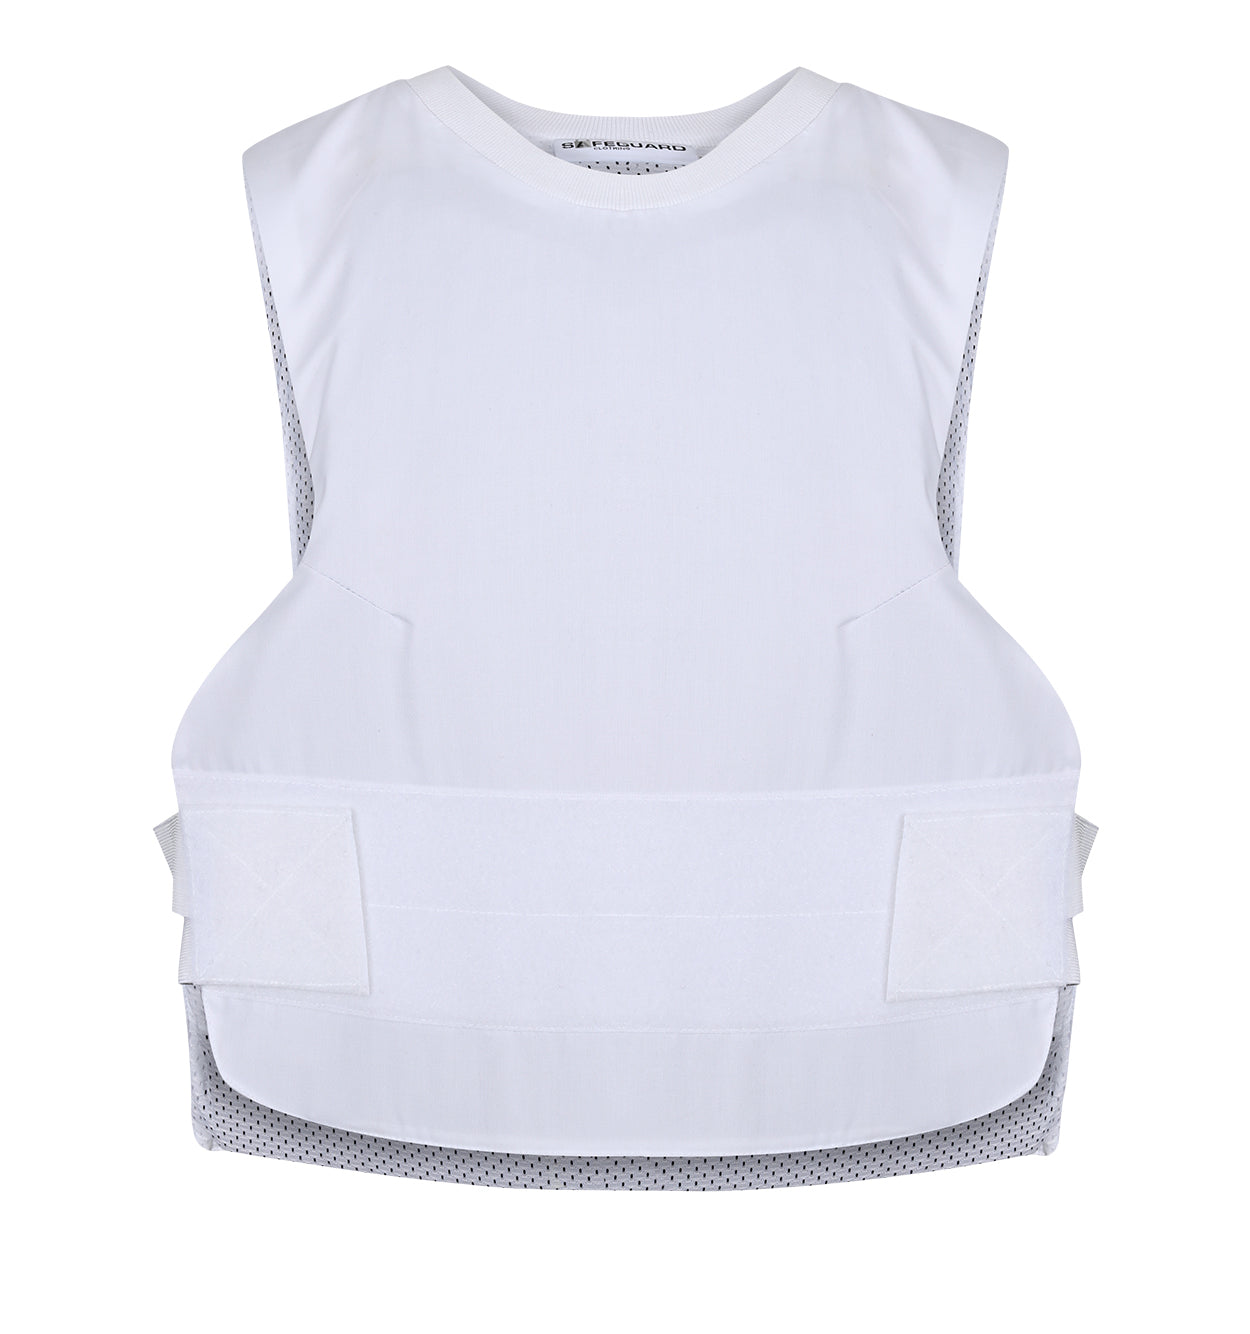 Stab Proof Vests Body Protection Vest with EVA Plate, Stab Proof Shockproof